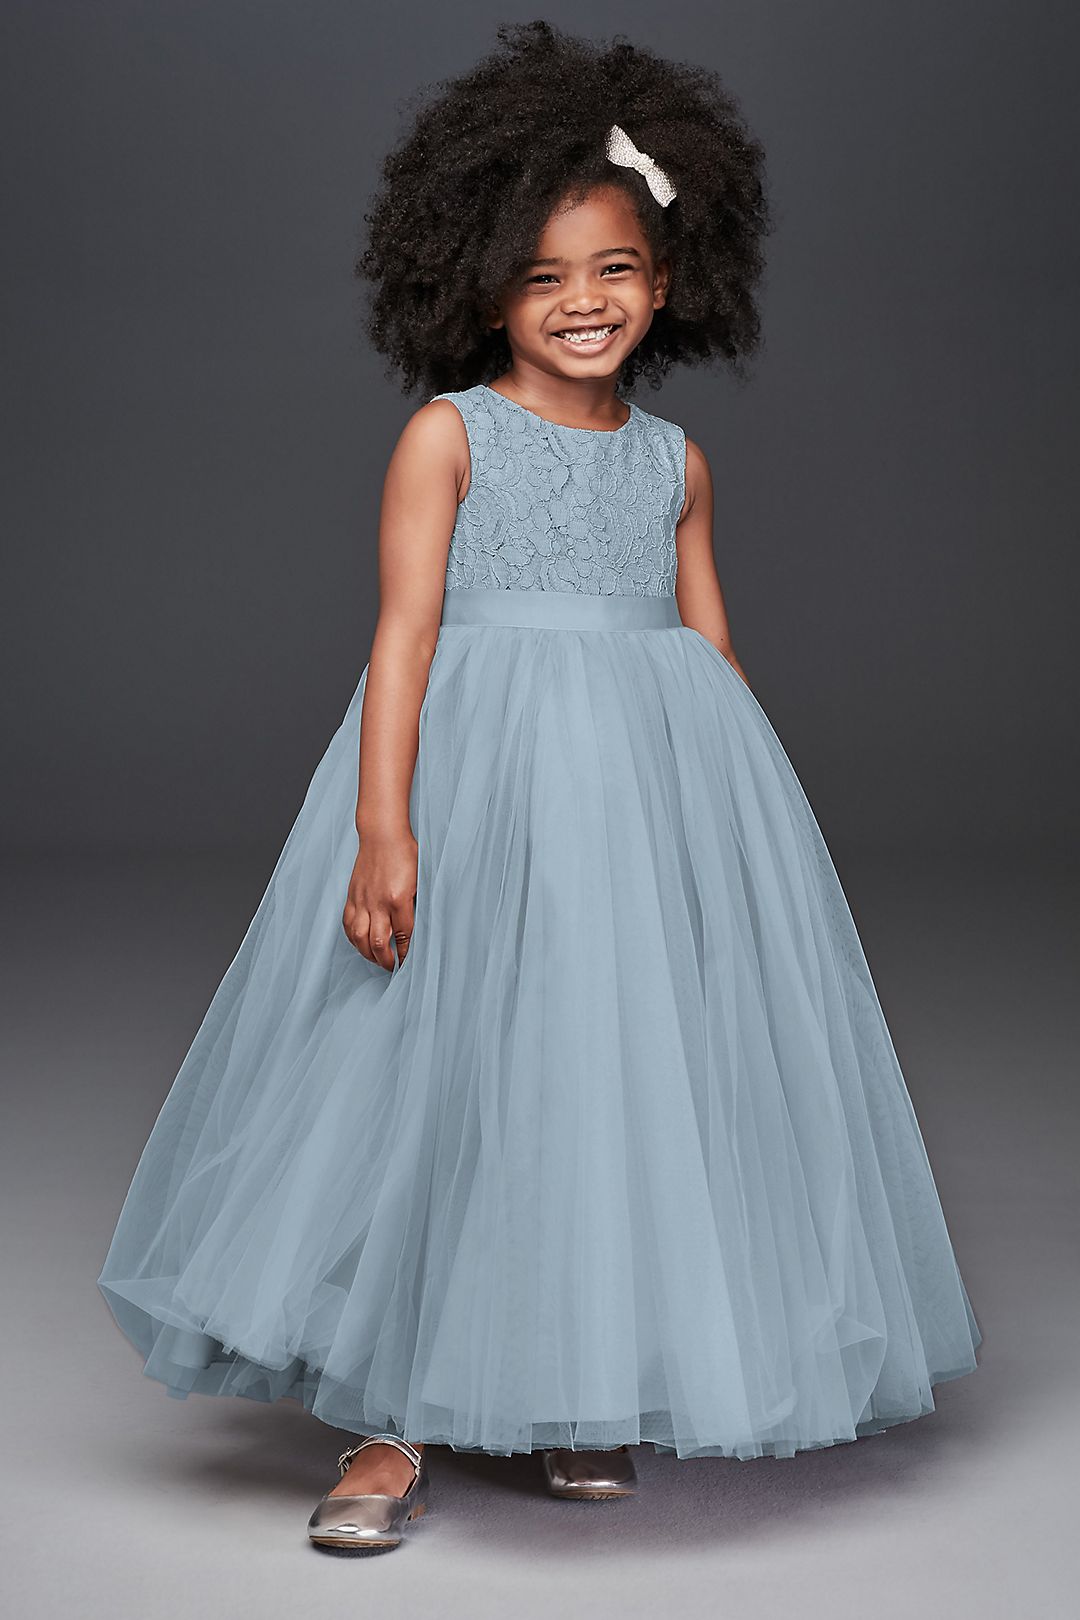 Ball Gown Flower Girl Dress with Heart Cutout Image 1